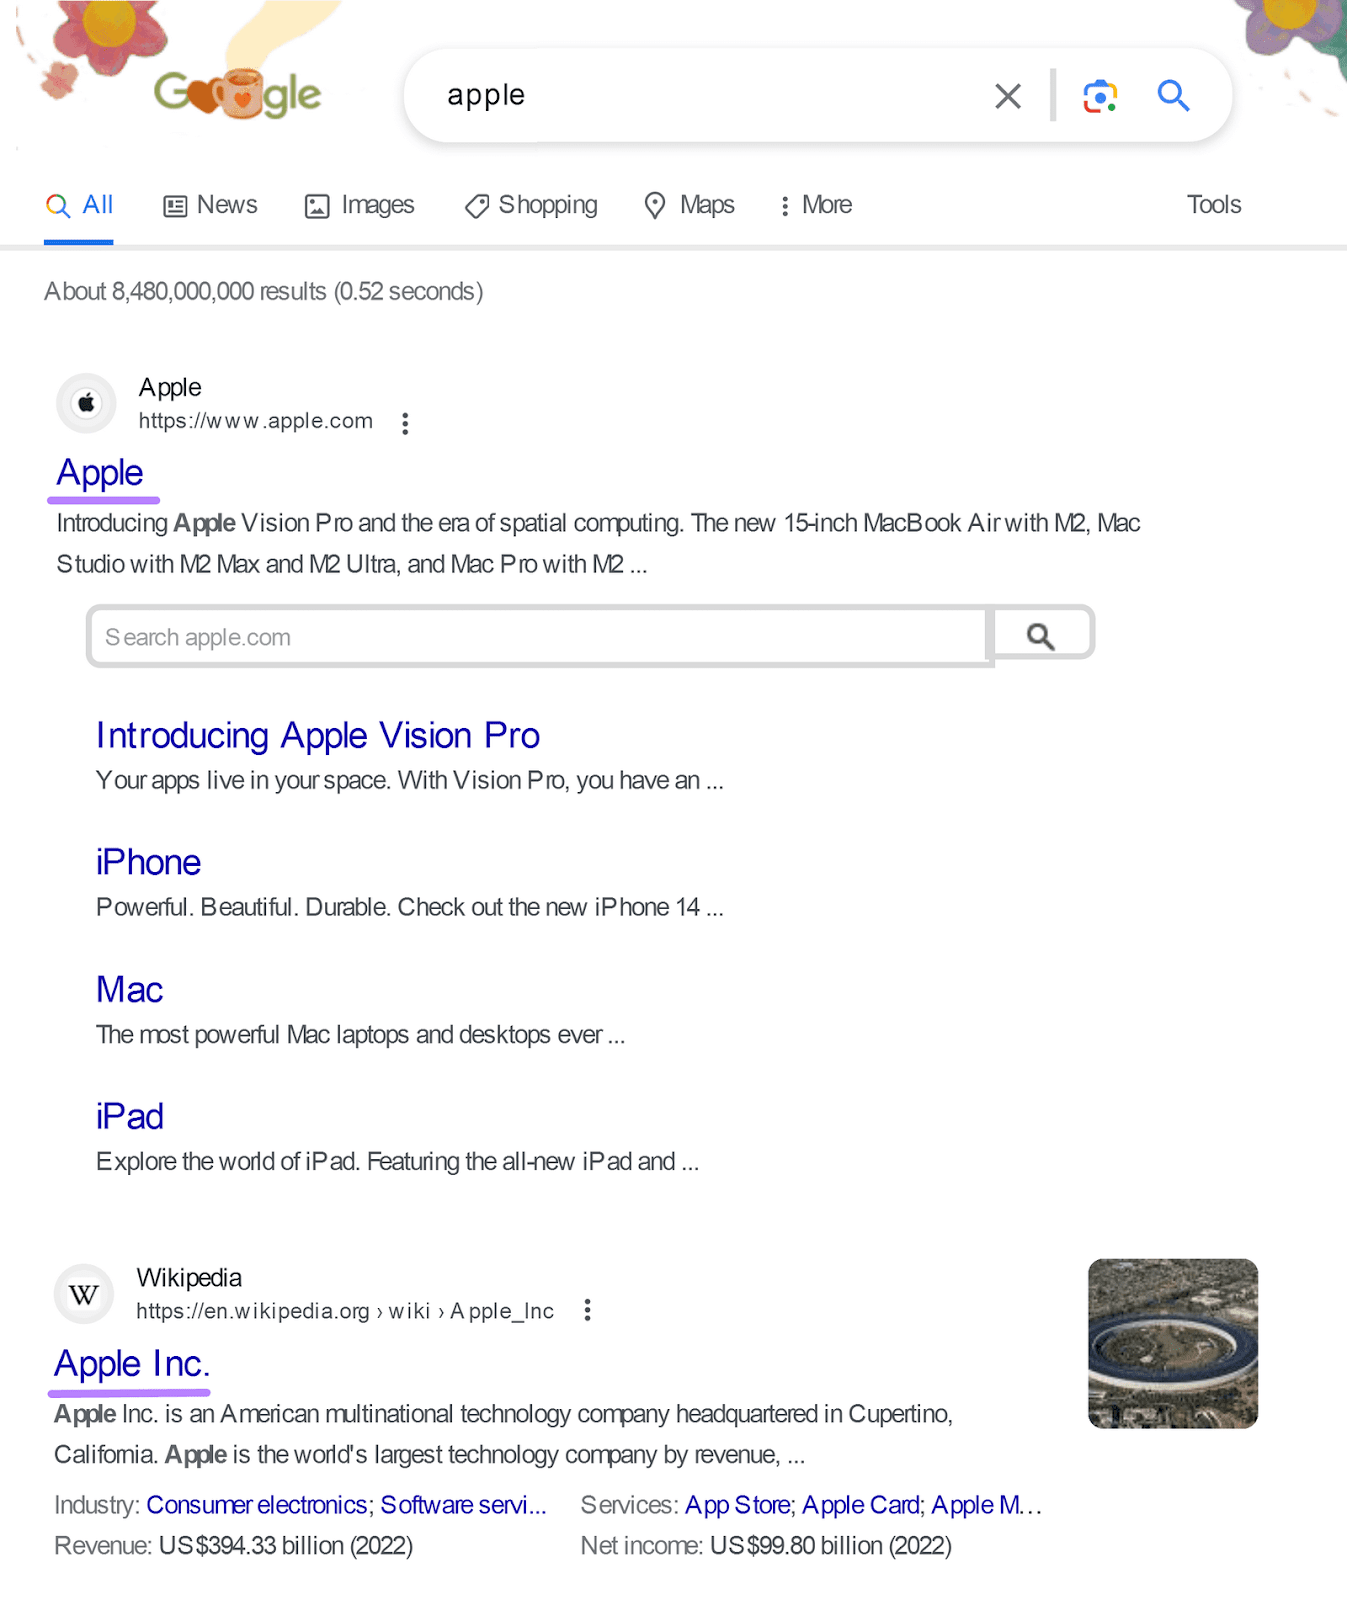 Google’s search results for “apple” in the U.S